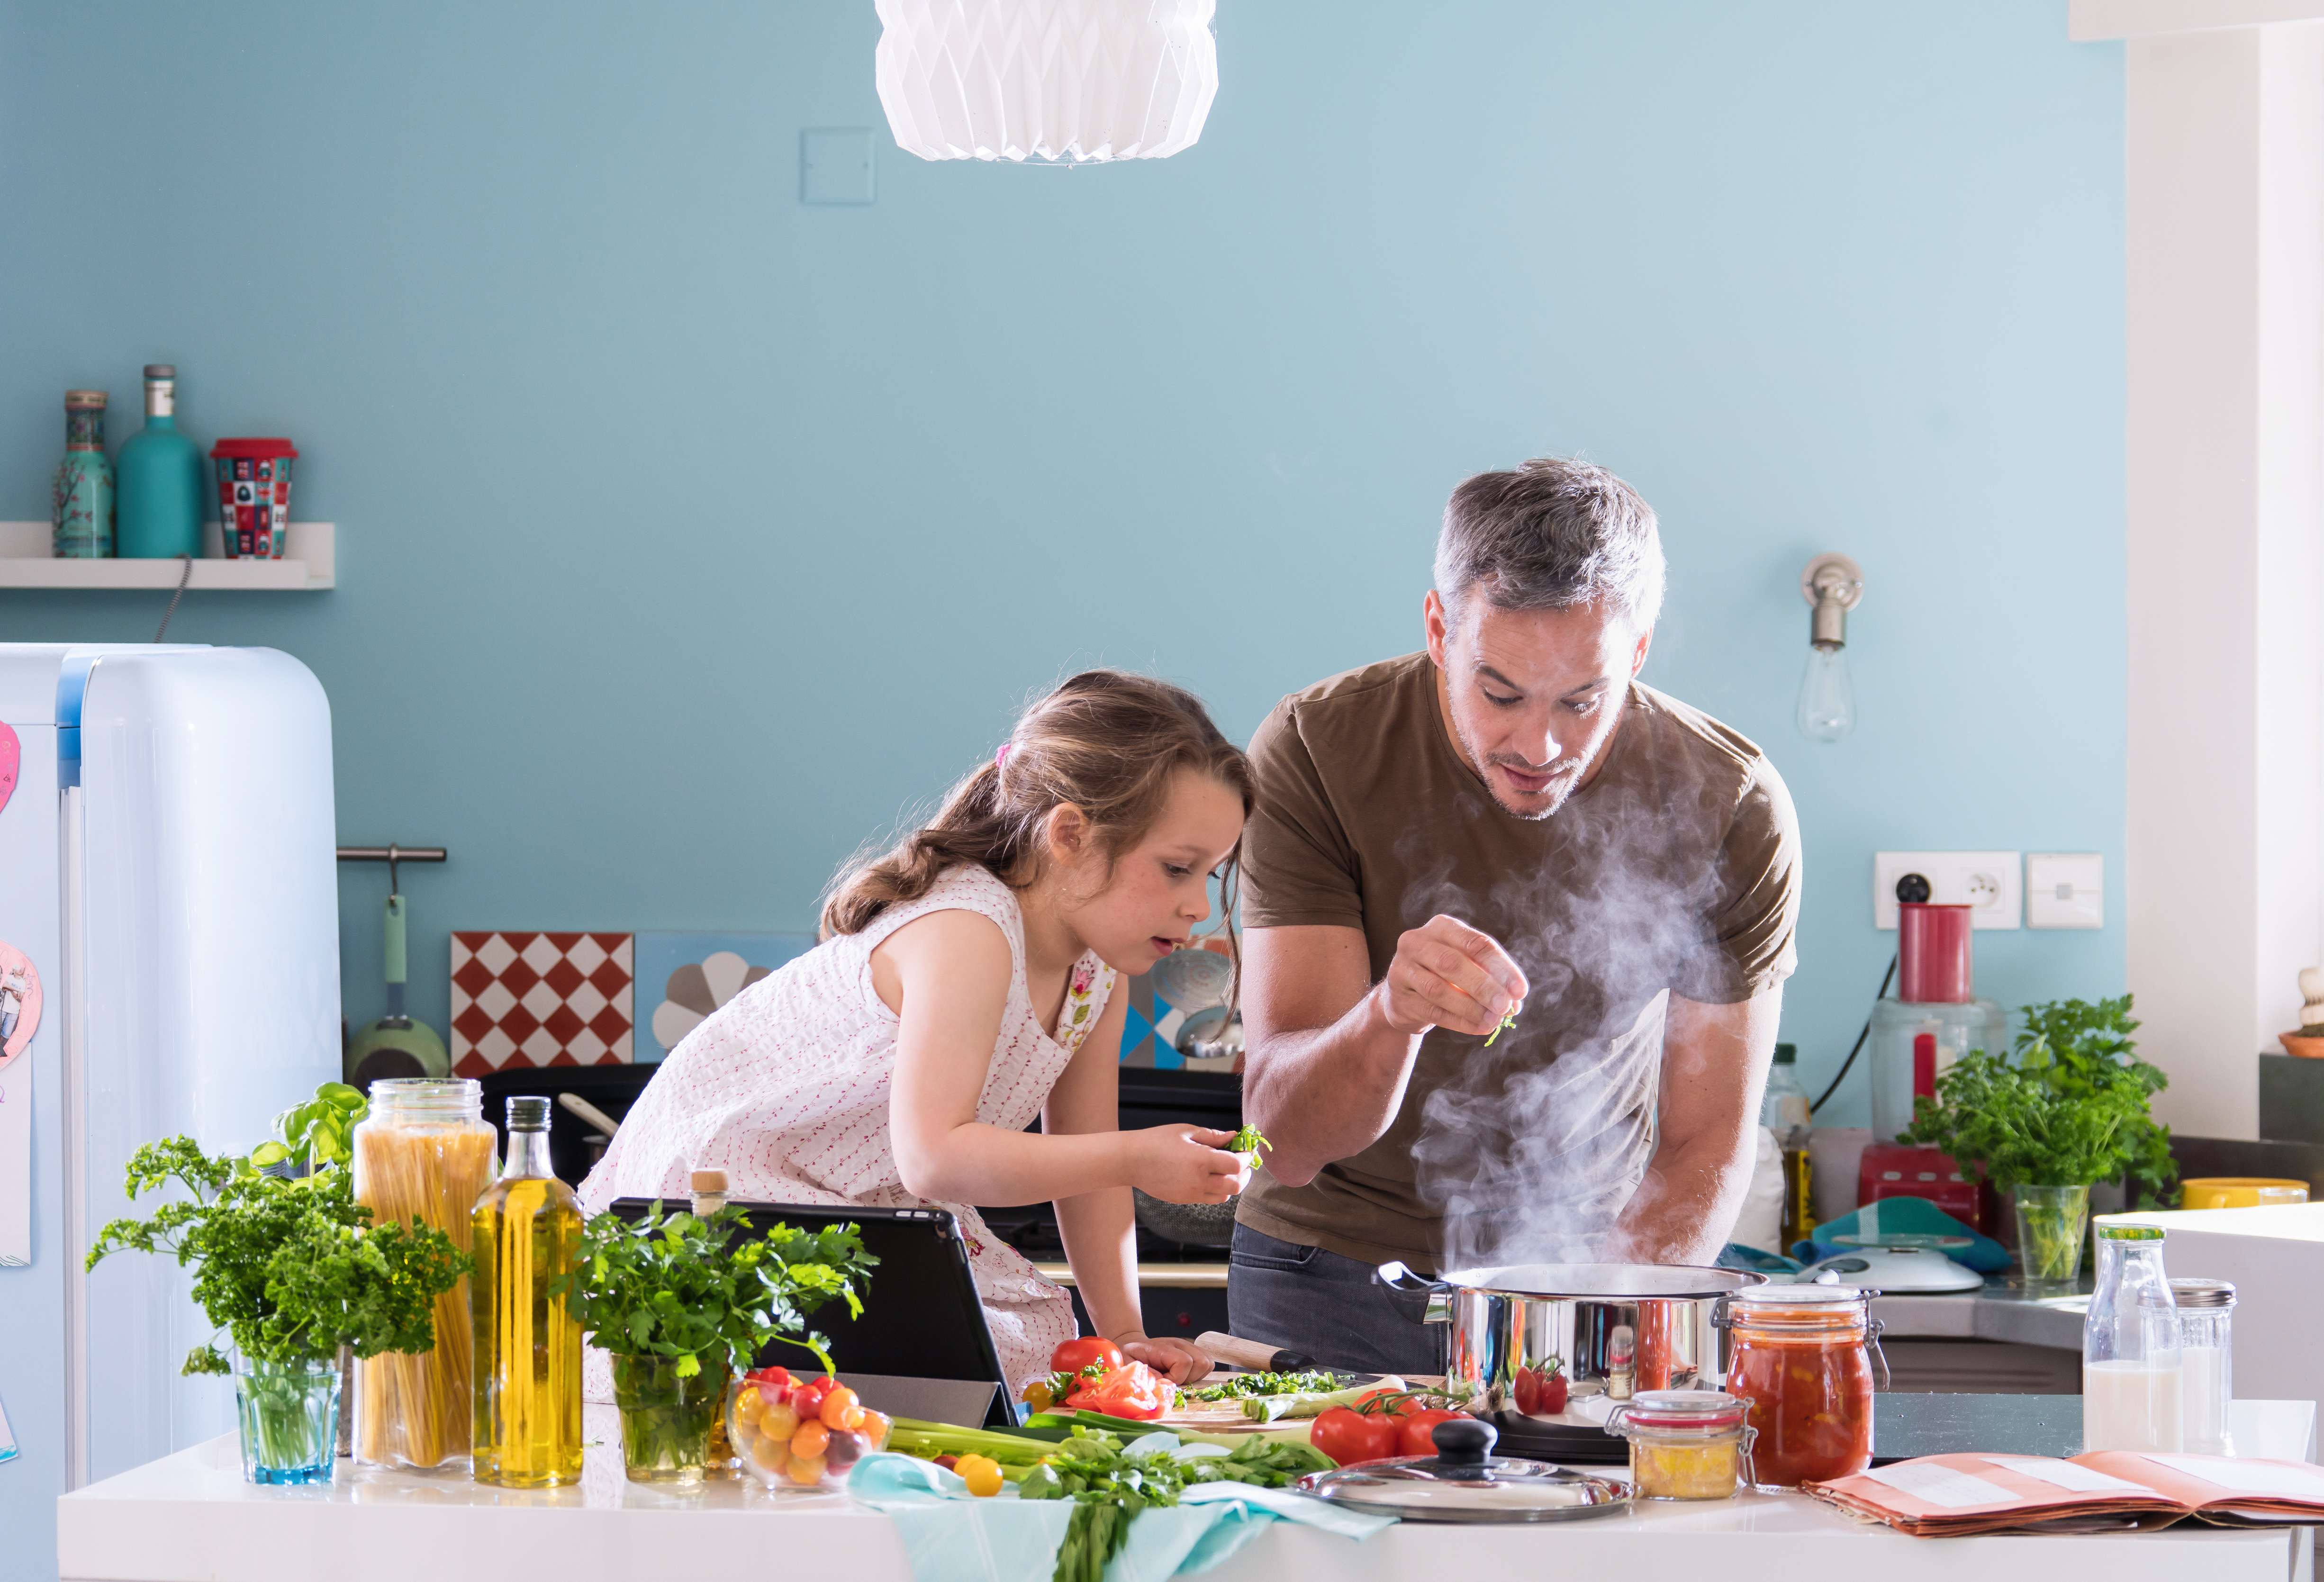 Daddy cooking food with his little girl in the kitchen | Source: Shutterstock